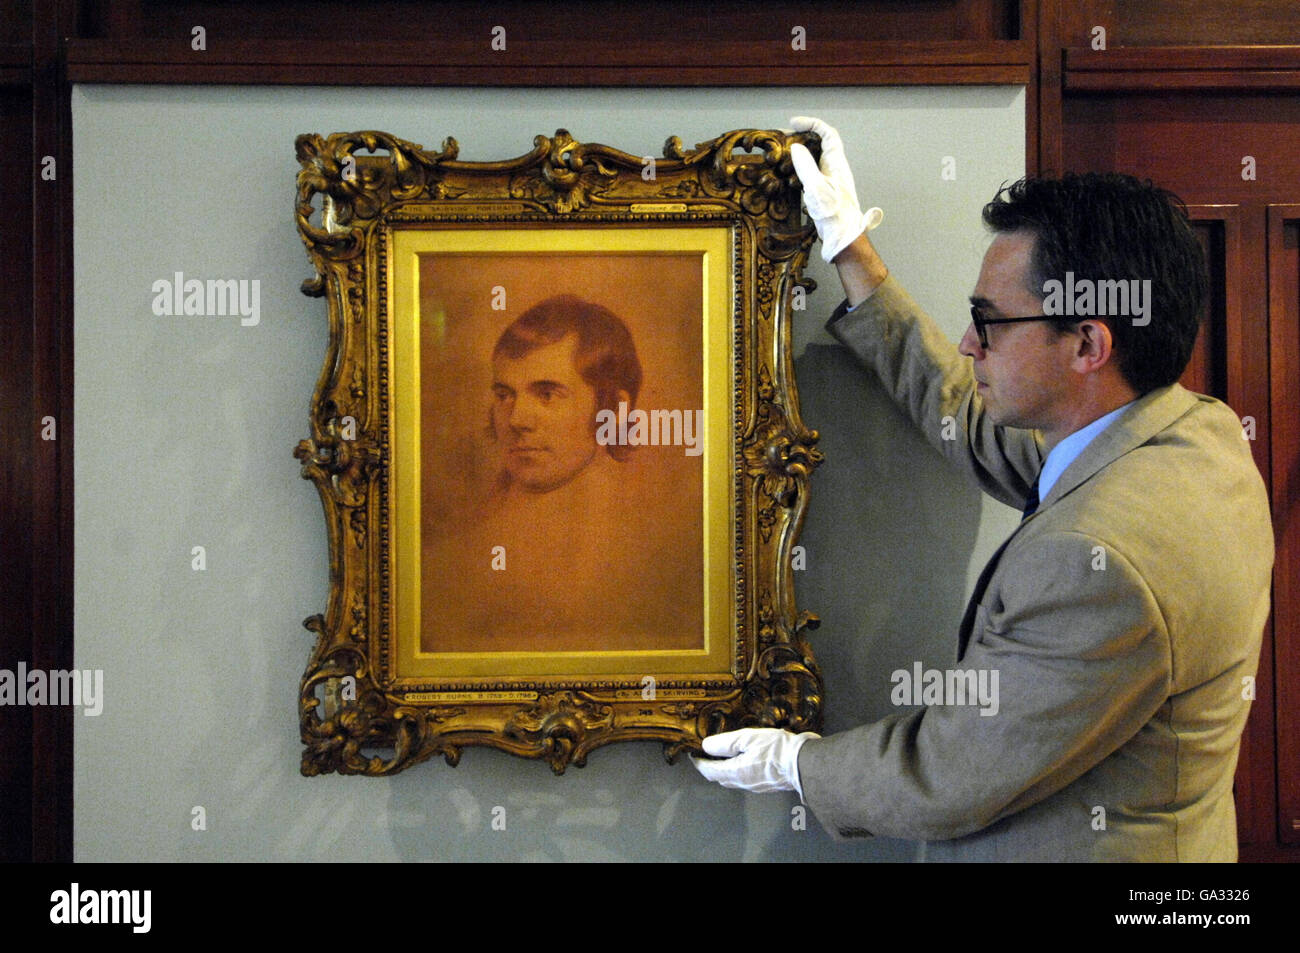 Dr Stephen Lloyd, Senior Curator of the National Galleries of Scotland, helps hang a picture of Robert Burns by Archibald Skirving, part of the Painting in Crayons: Pastel Portraits exhibition on show at Scottish National Portrait Gallery in Edinburgh, form 21 July to 30 September 2007. Stock Photo